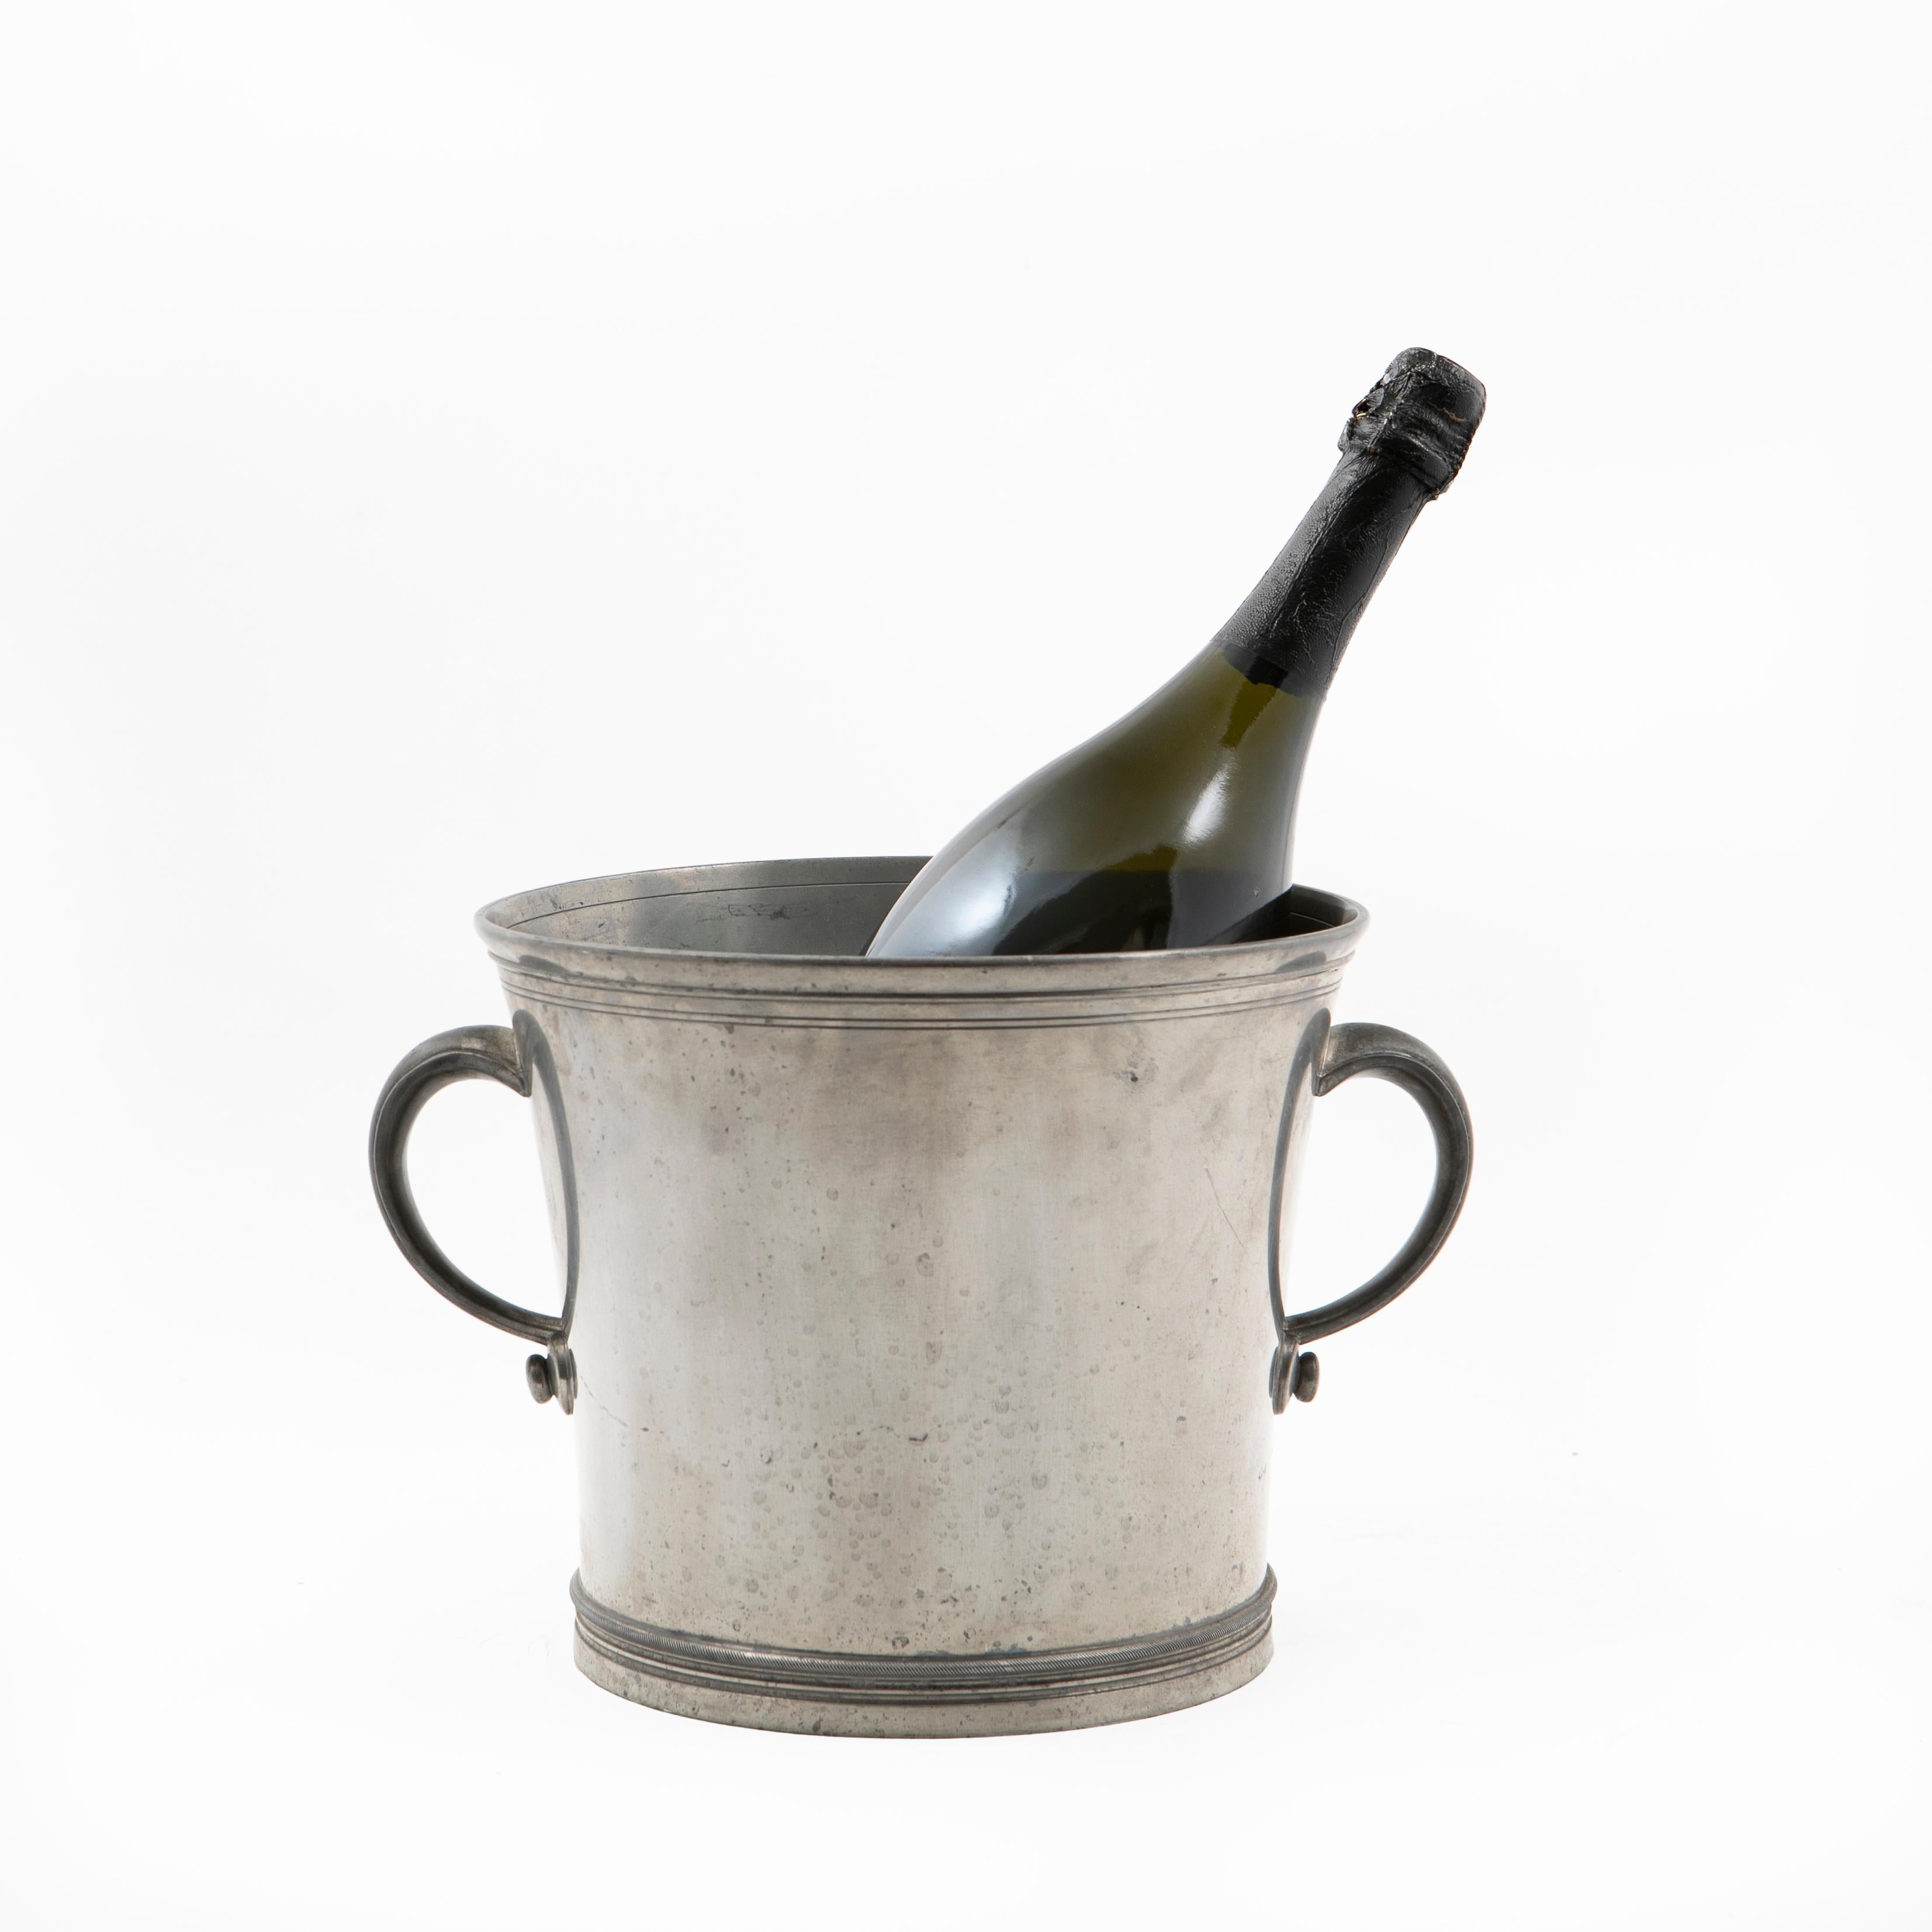 Just Andersen pewter wine cooler / ice bucket with handles.
Stamped JUST and numbered 1912 on base.

Given as a gift with the inscription:
